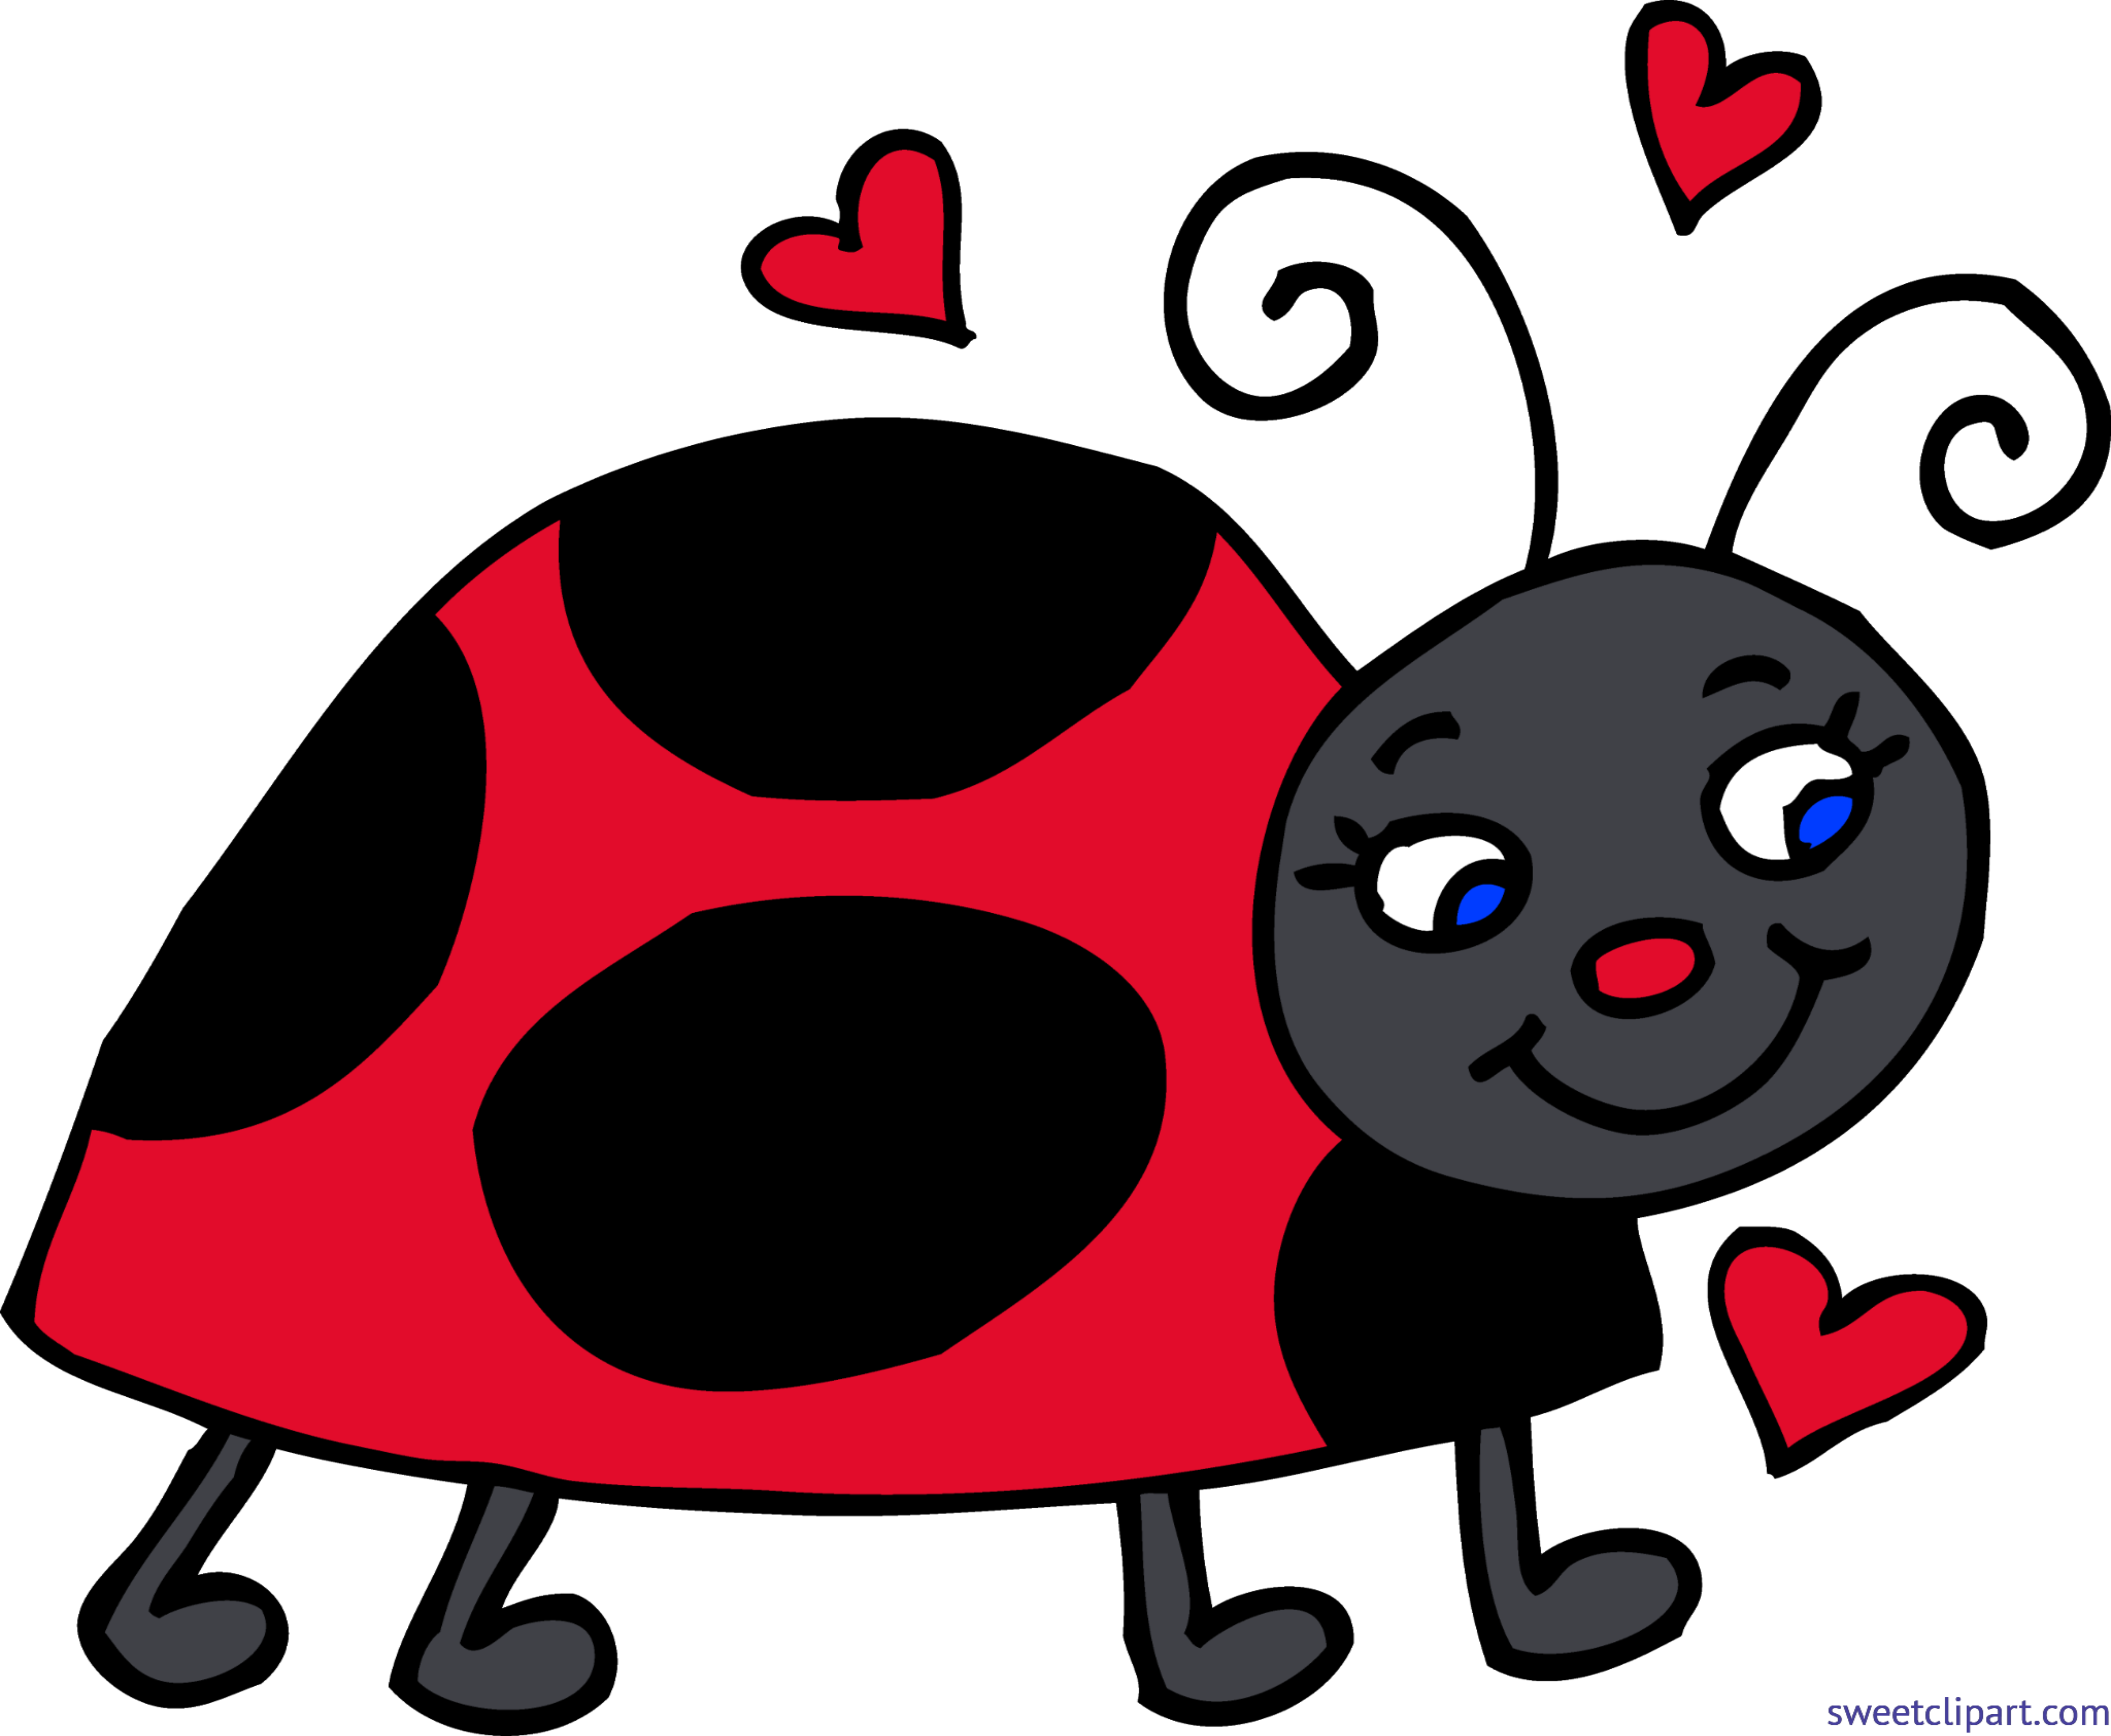 Email clipart design cute. Ladybug at getdrawings com